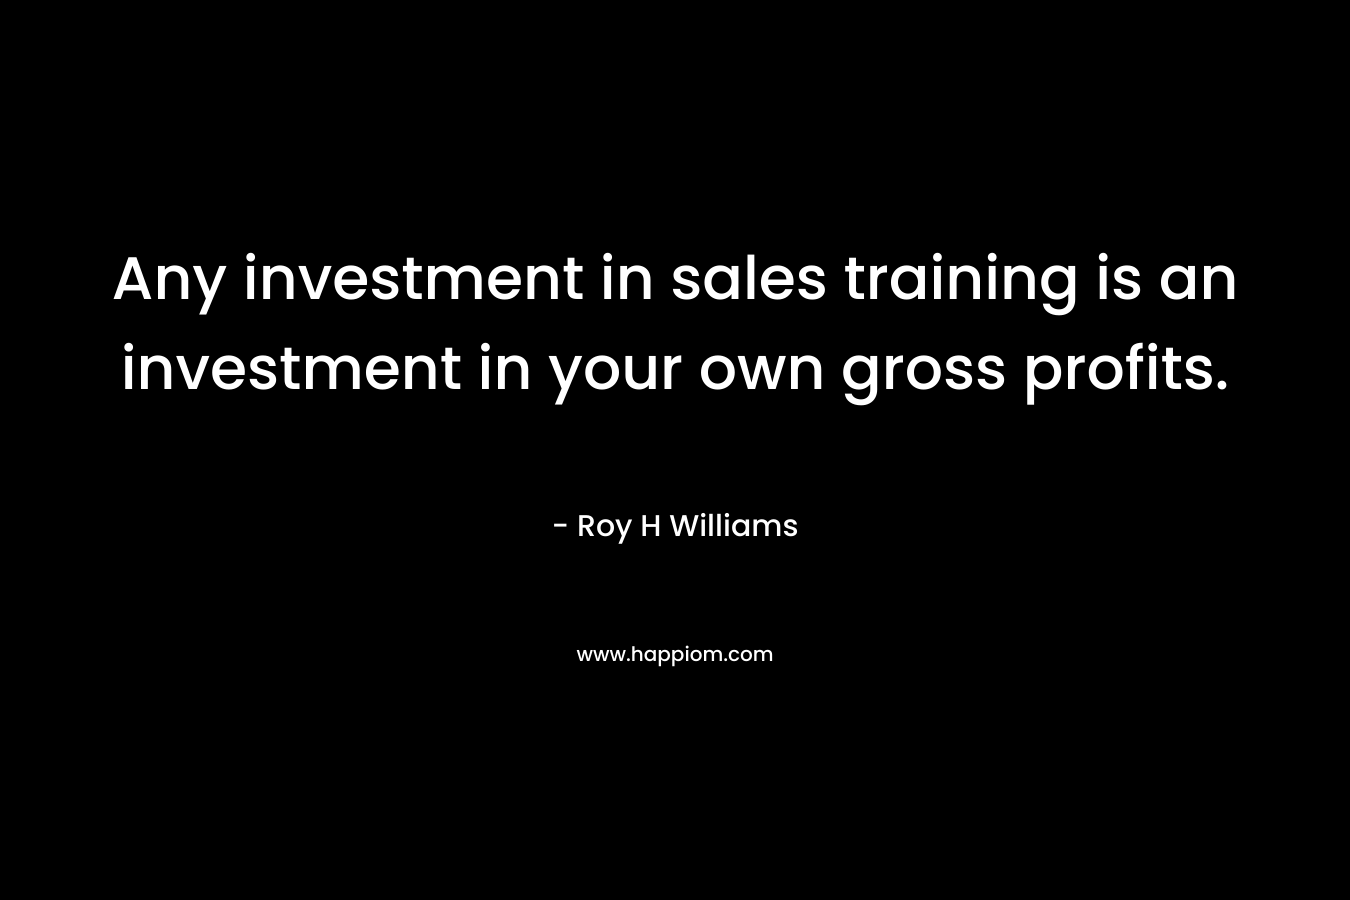 Any investment in sales training is an investment in your own gross profits. – Roy H Williams